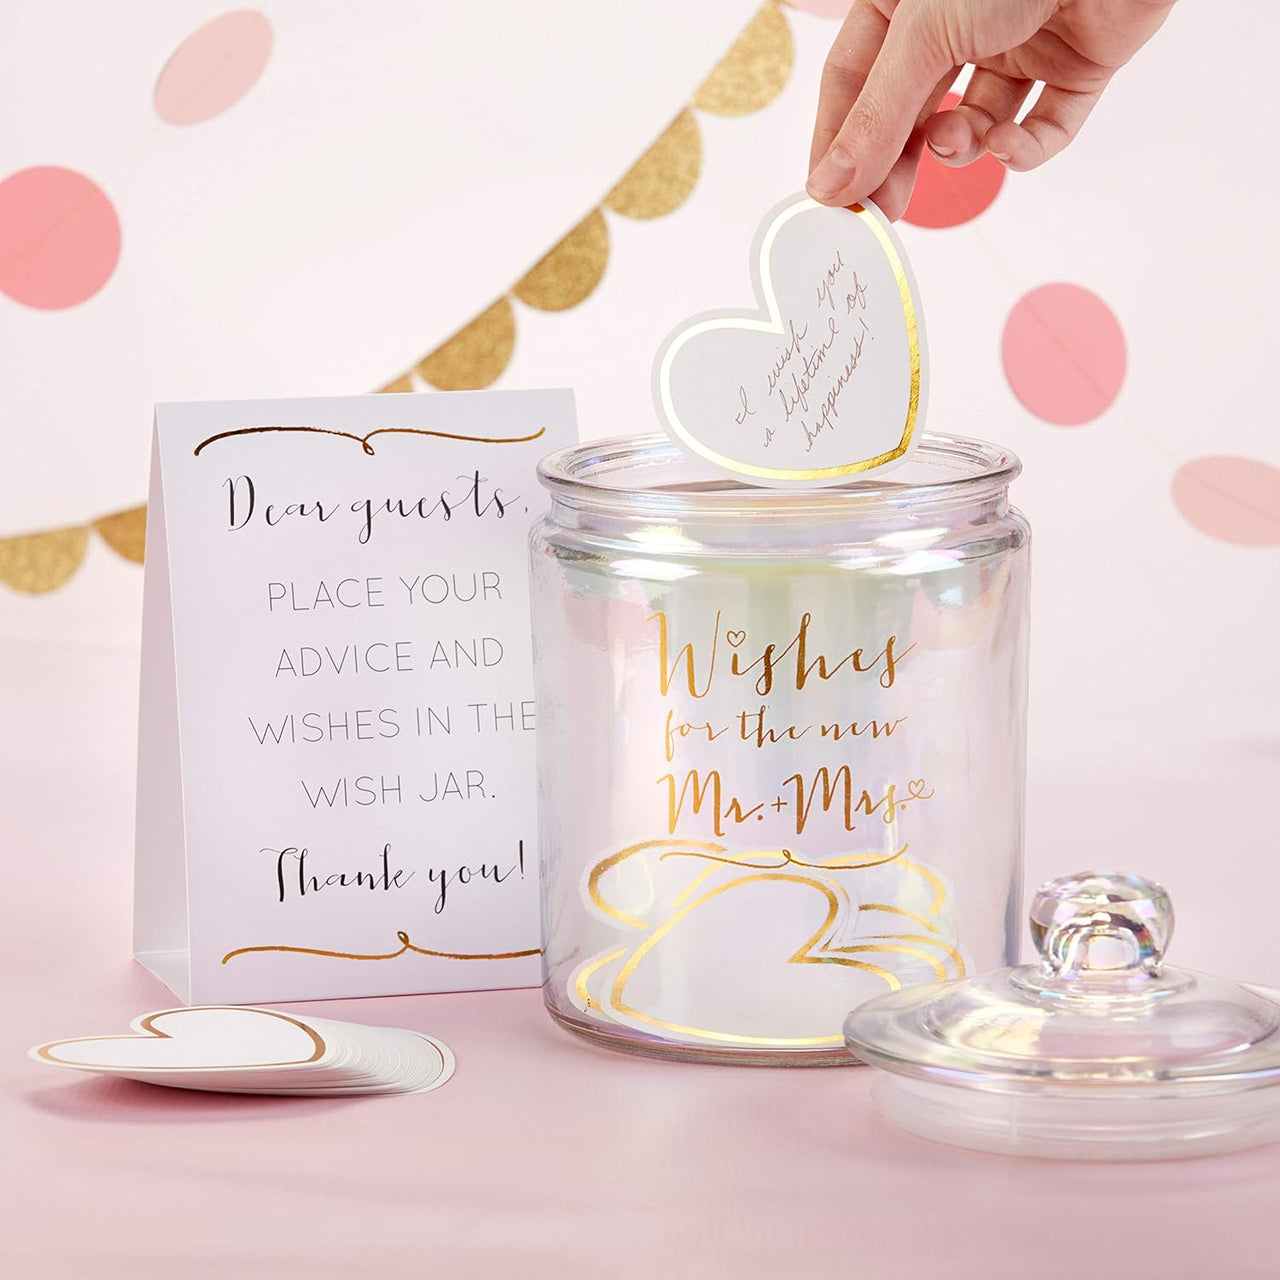 Iridescent Wedding Wish Jar with Heart Shaped Cards